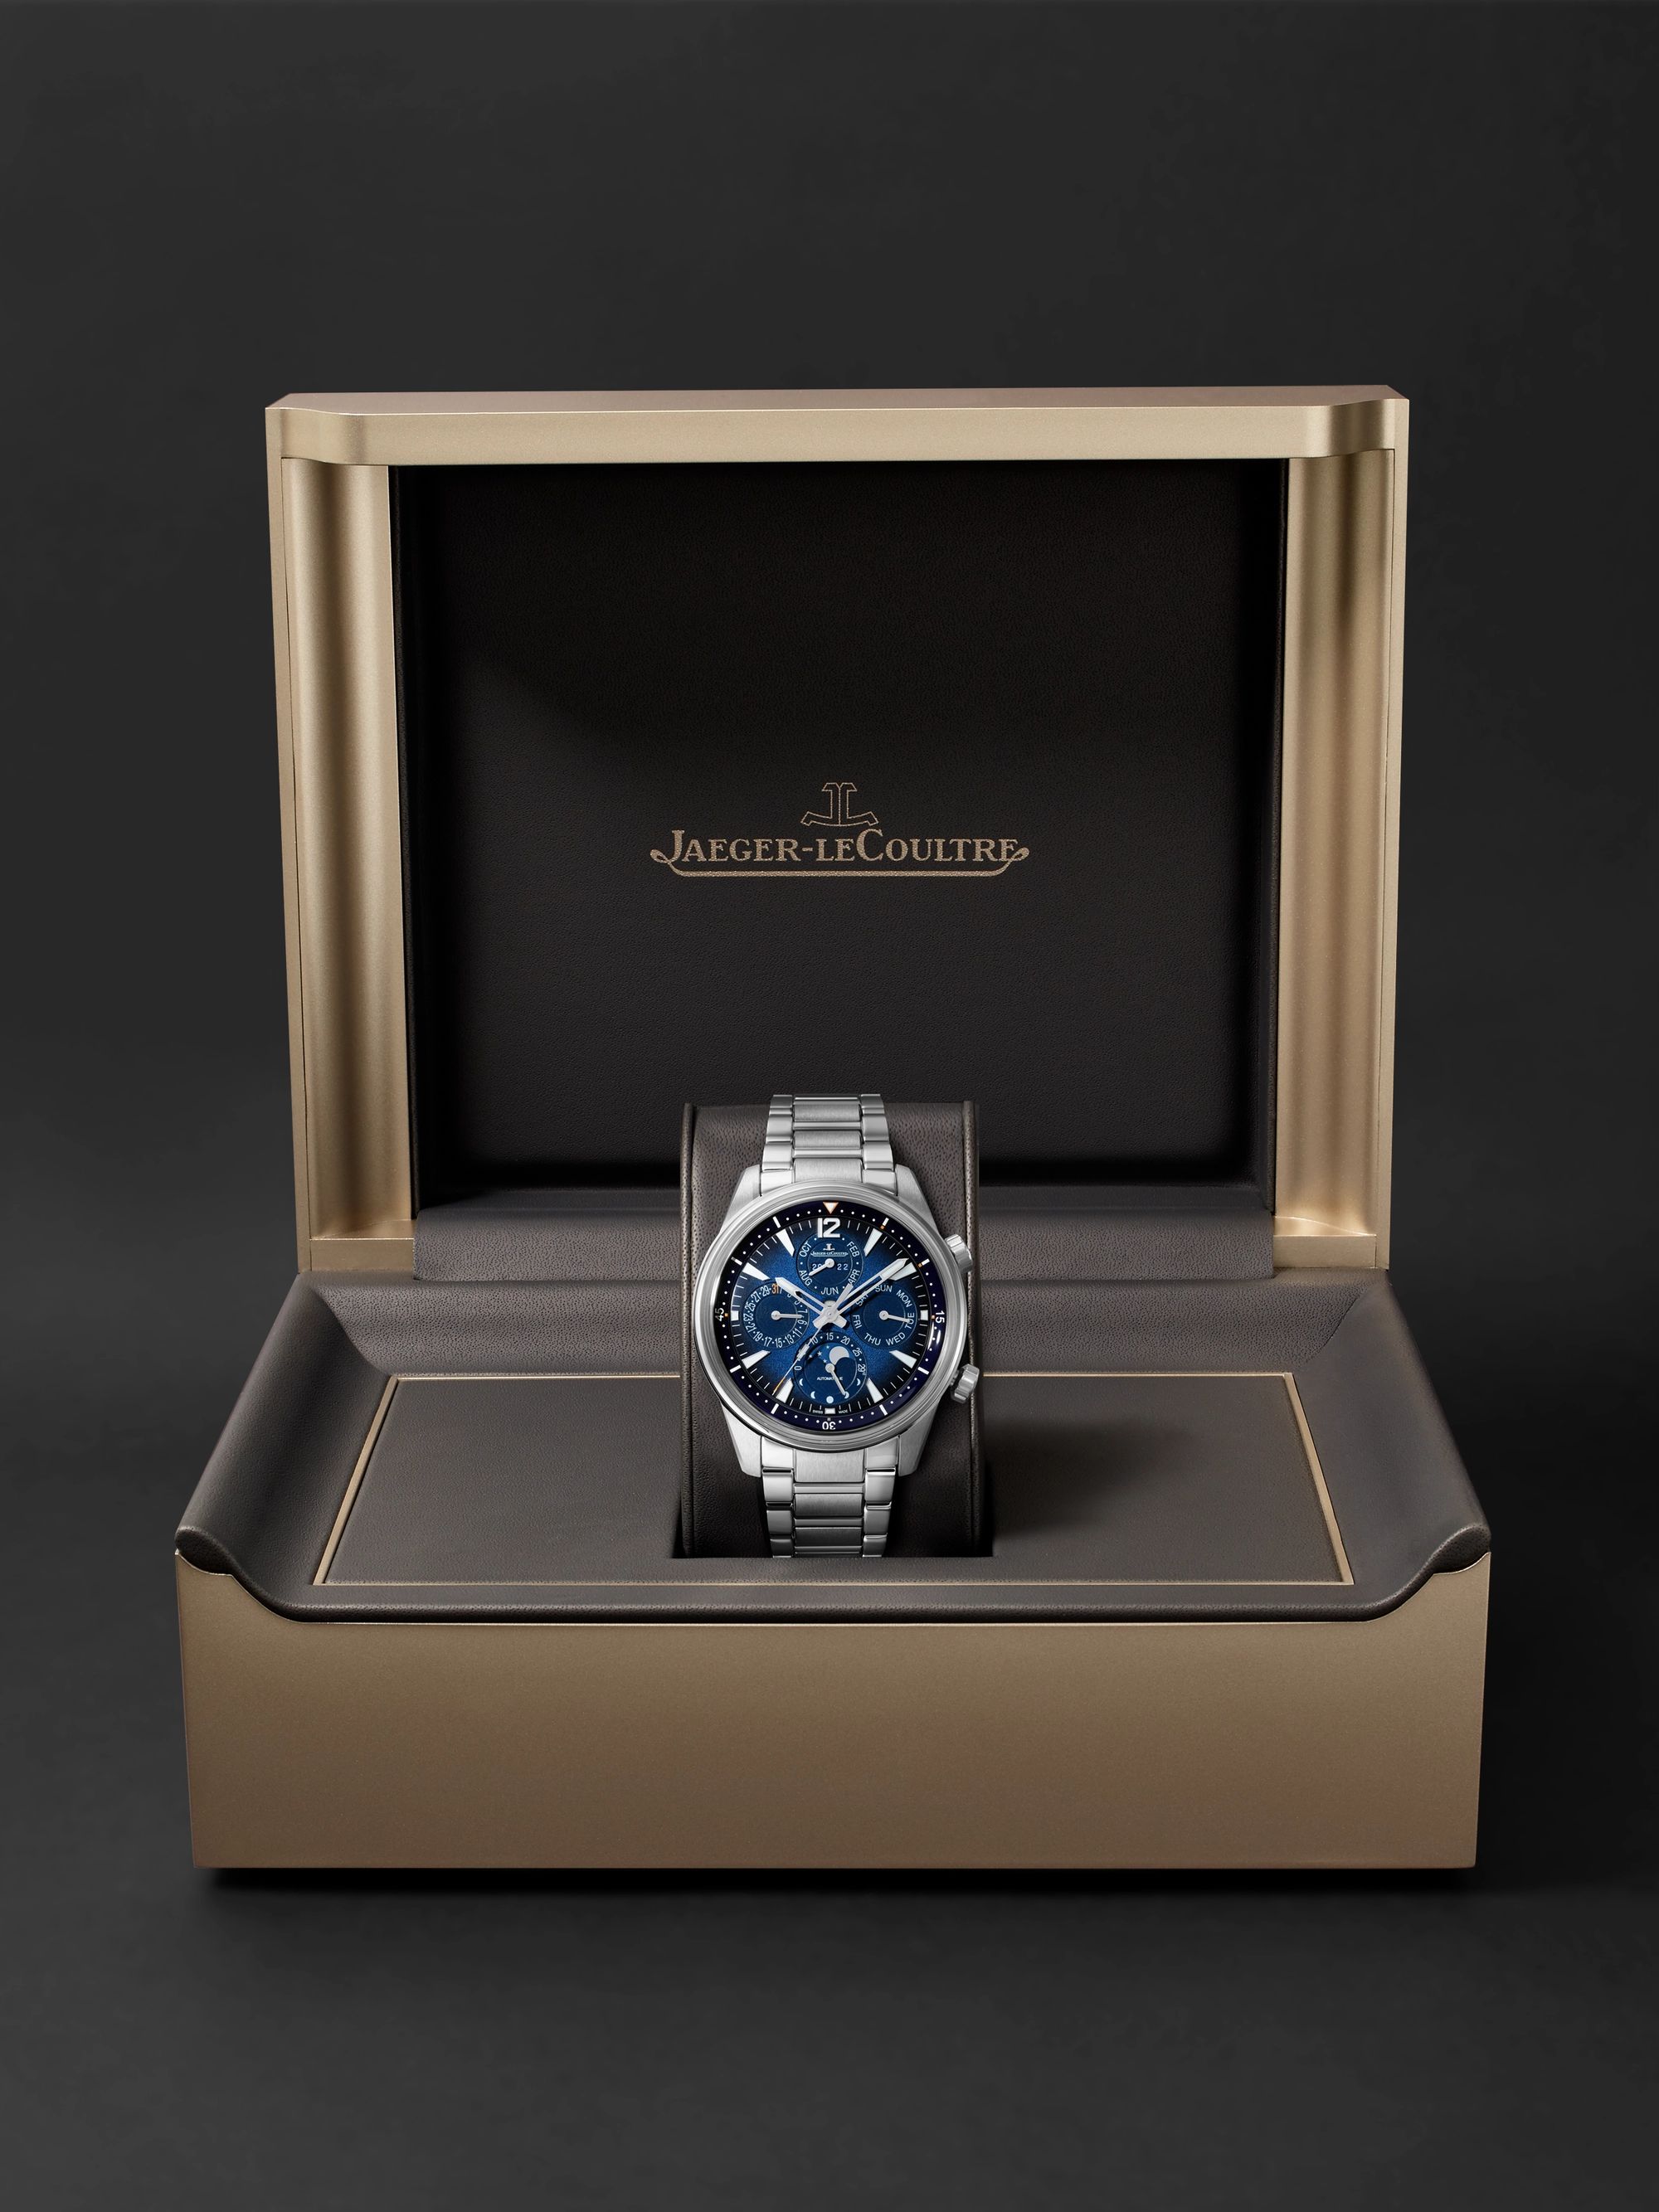 JAEGER-LECOULTRE Polaris Perpetual Calendar Automatic 42mm Stainless Steel Watch, Ref. No. 9088180